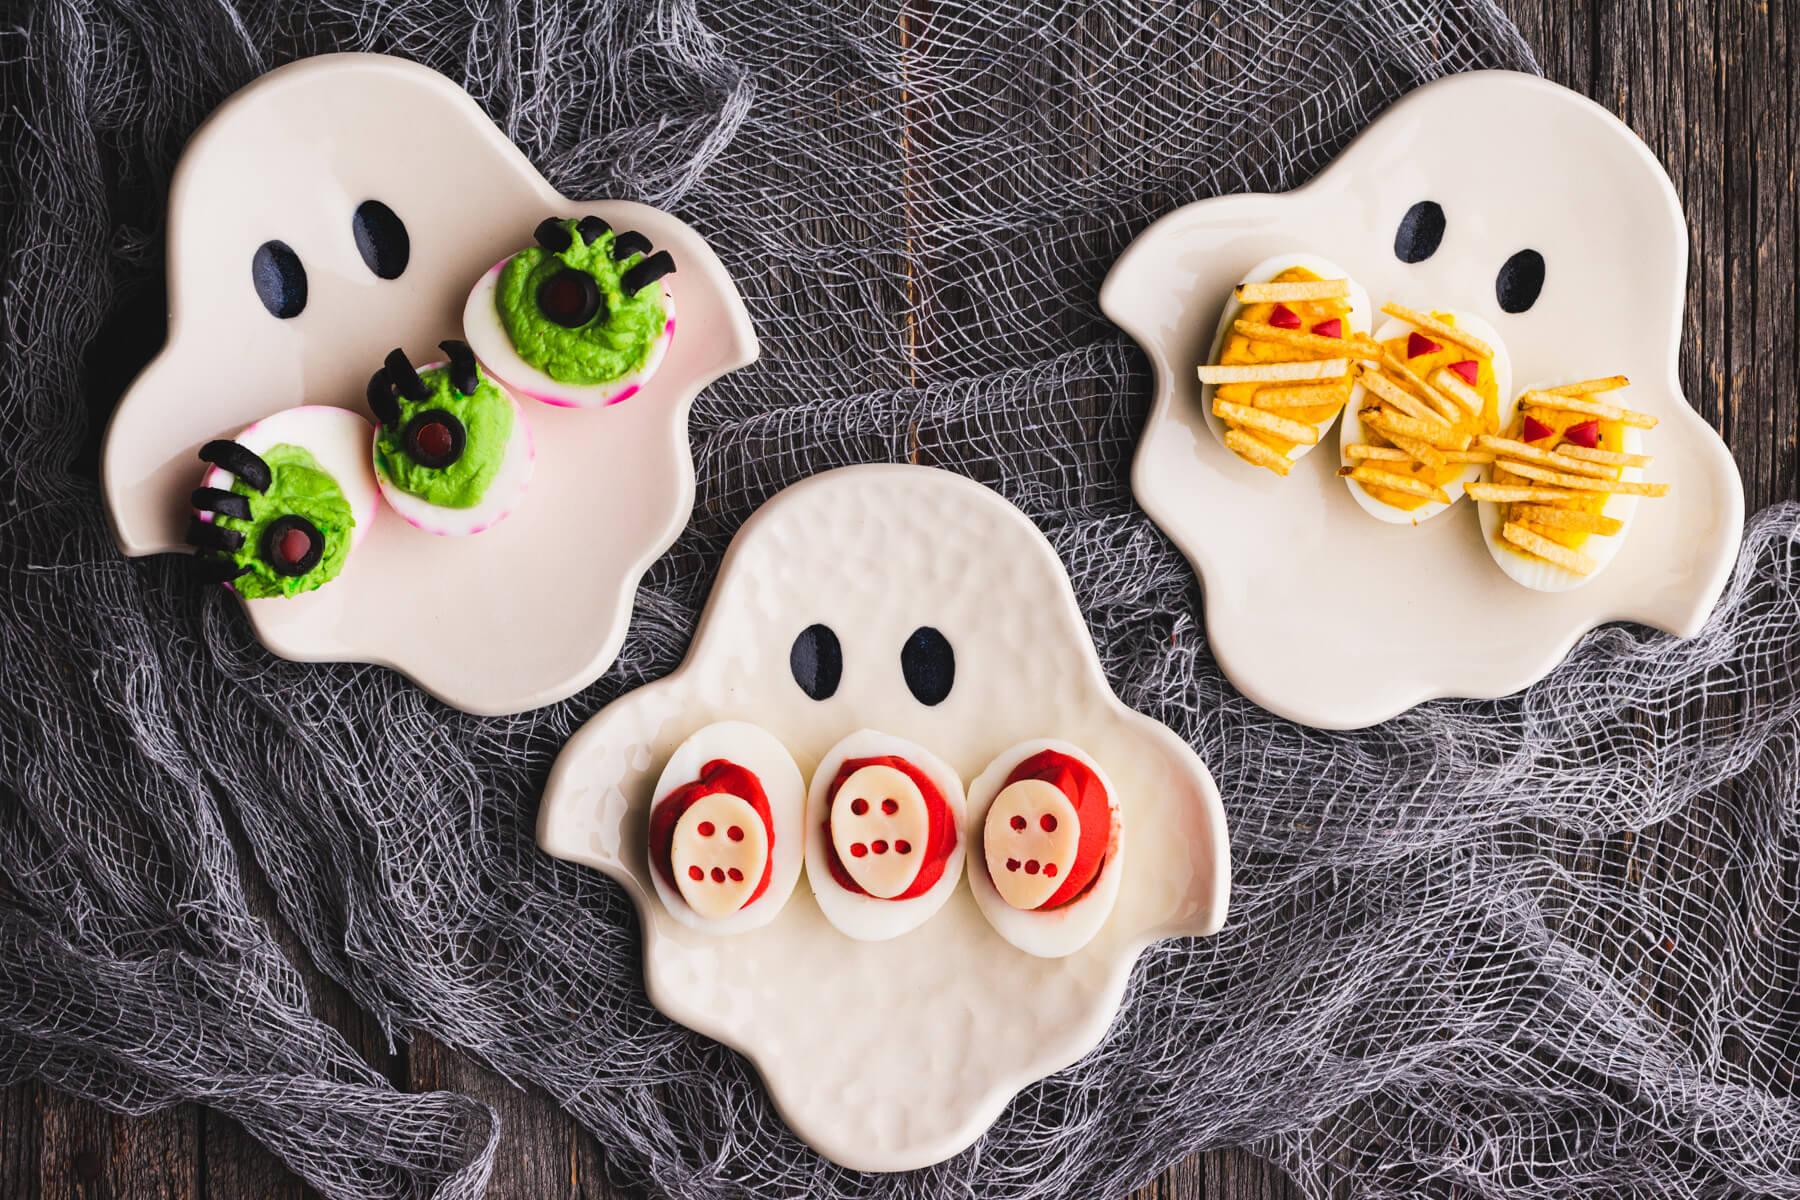 Three ghost shaped plates hold an assortment of Halloween deviled eggs.